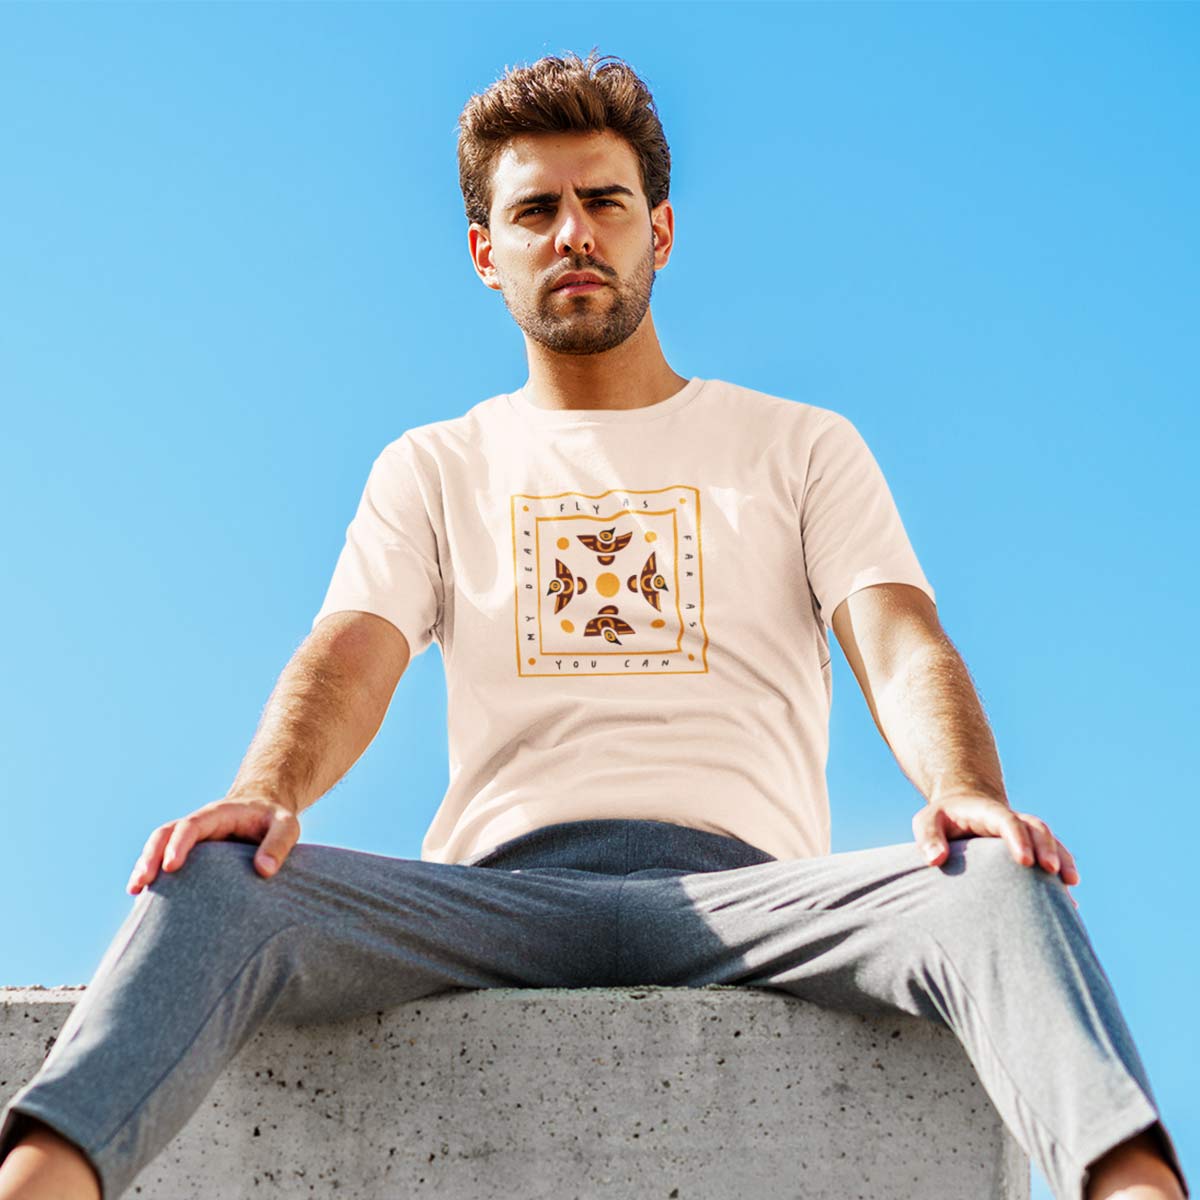 Fly-far-printed-t-shirt-for-men by Ghumakkad